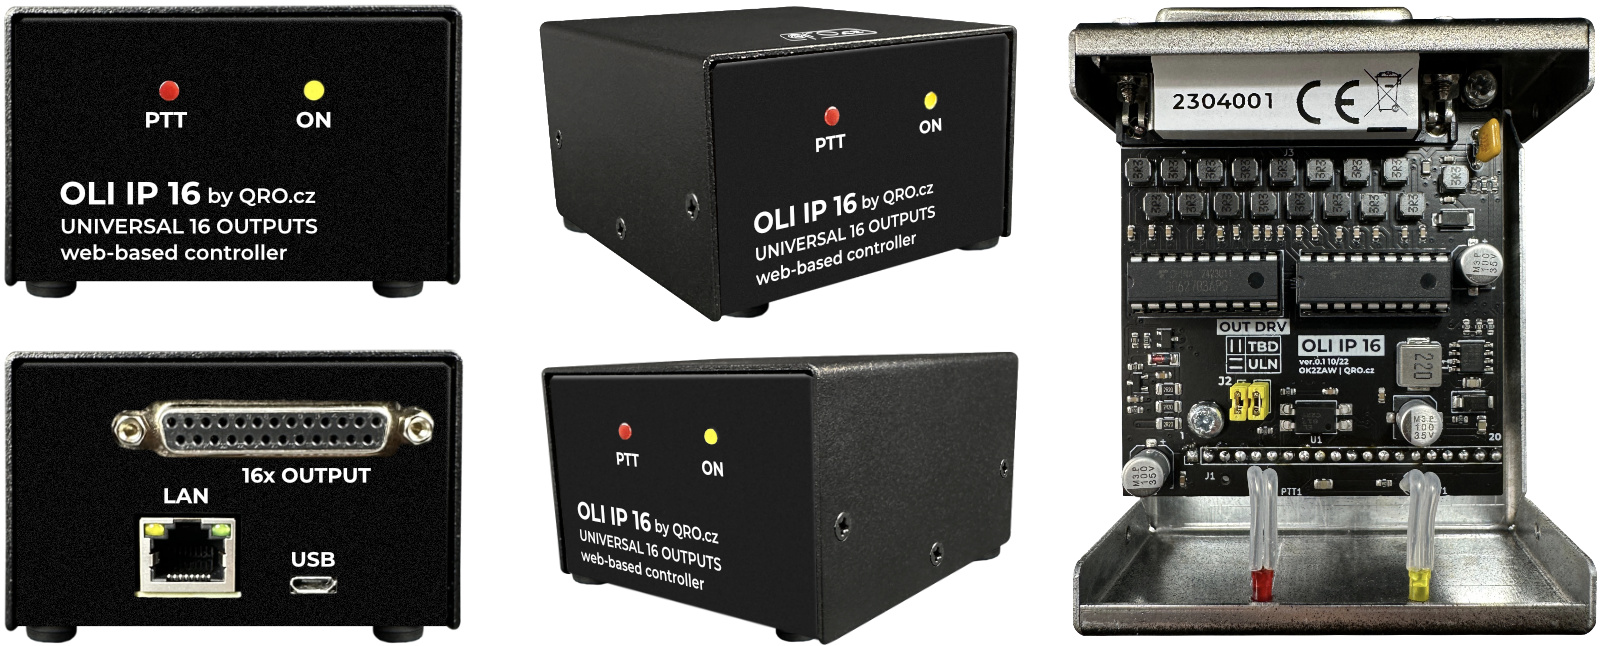 oli ip 16 controller assembled in enclosure by qro.cz hamparts.shop